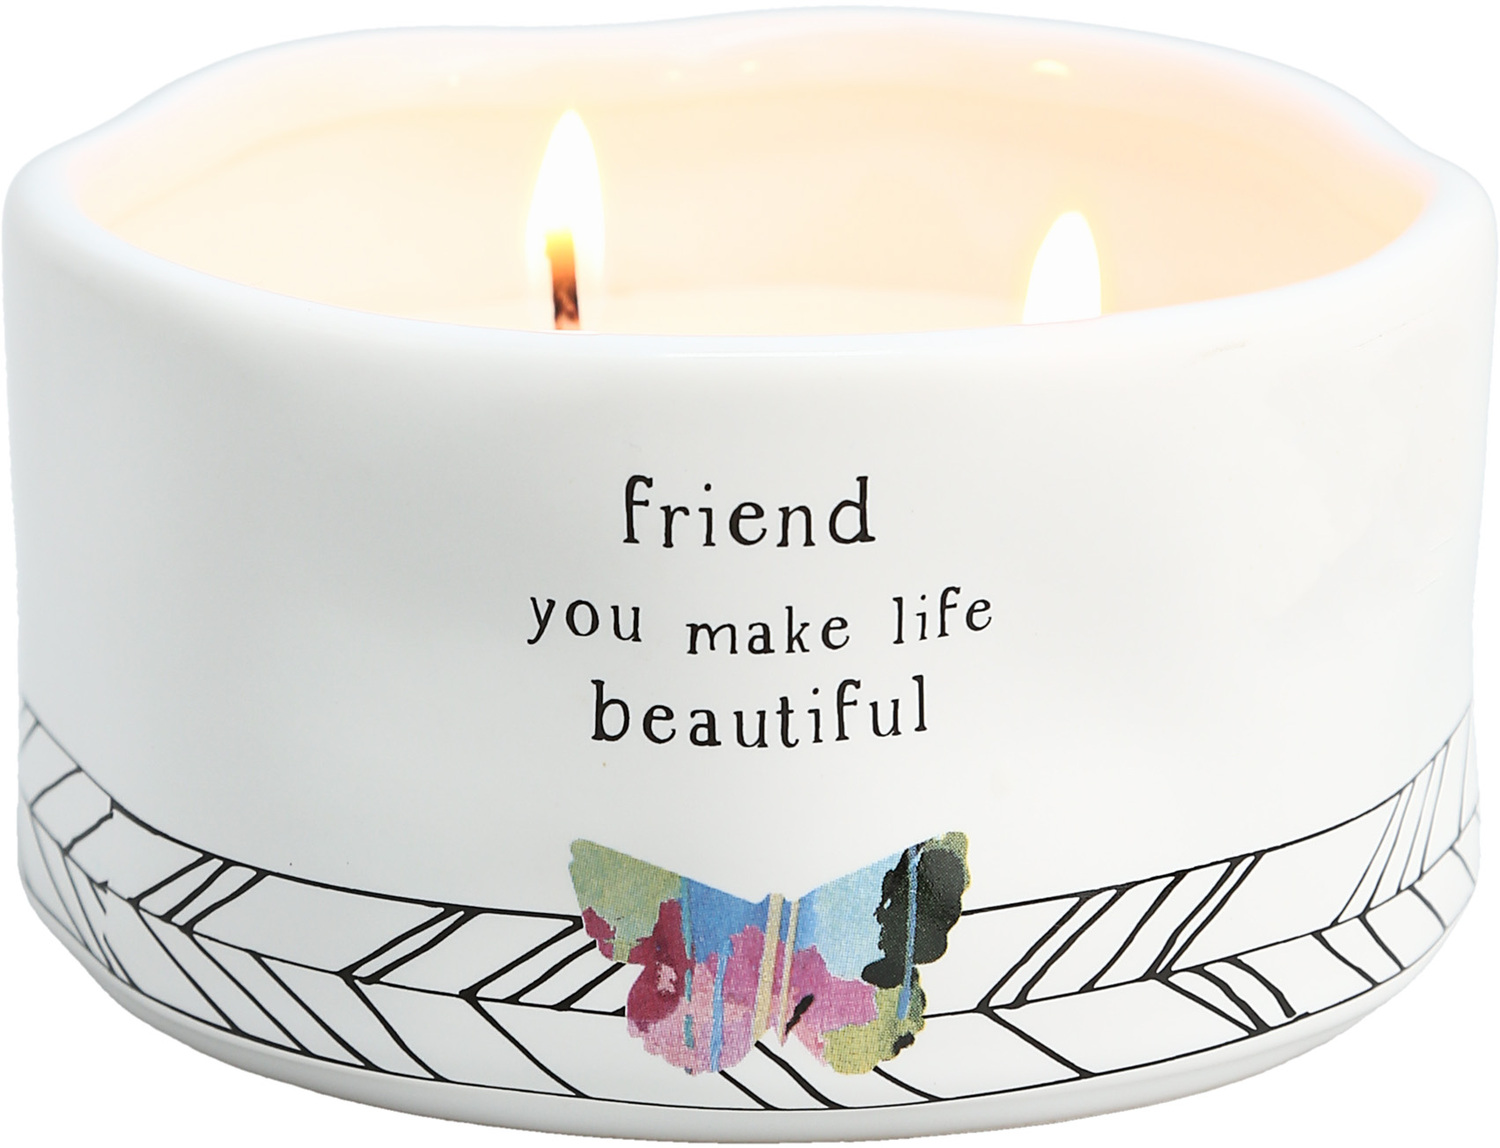 Friend by Celebrating You - Friend - 8 oz - 100% Soy Wax Candle Scent: Tranquility